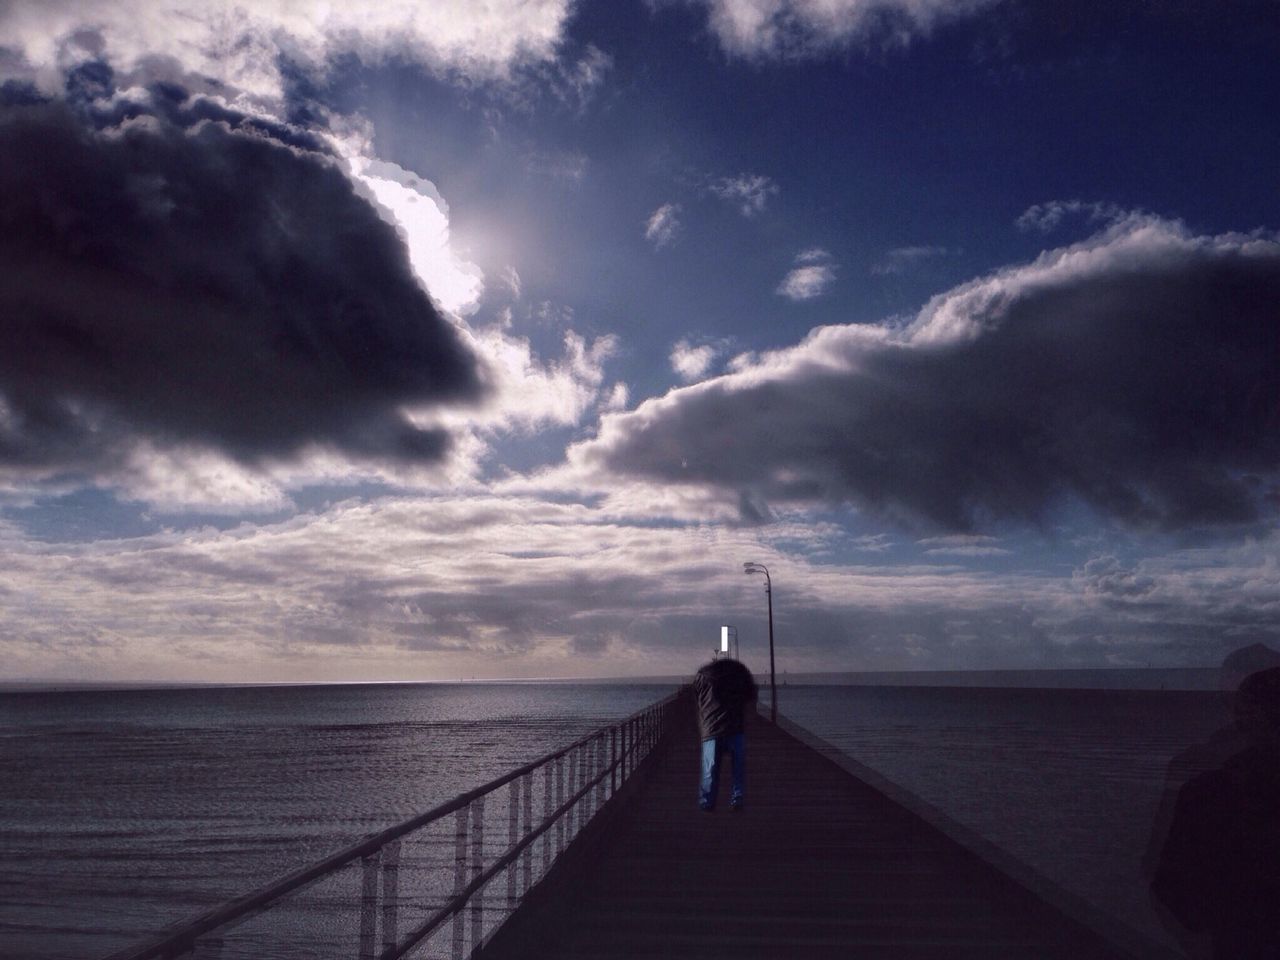 sky, sea, water, cloud - sky, pier, horizon over water, railing, cloudy, the way forward, scenics, tranquility, cloud, tranquil scene, nature, rear view, men, beauty in nature, full length